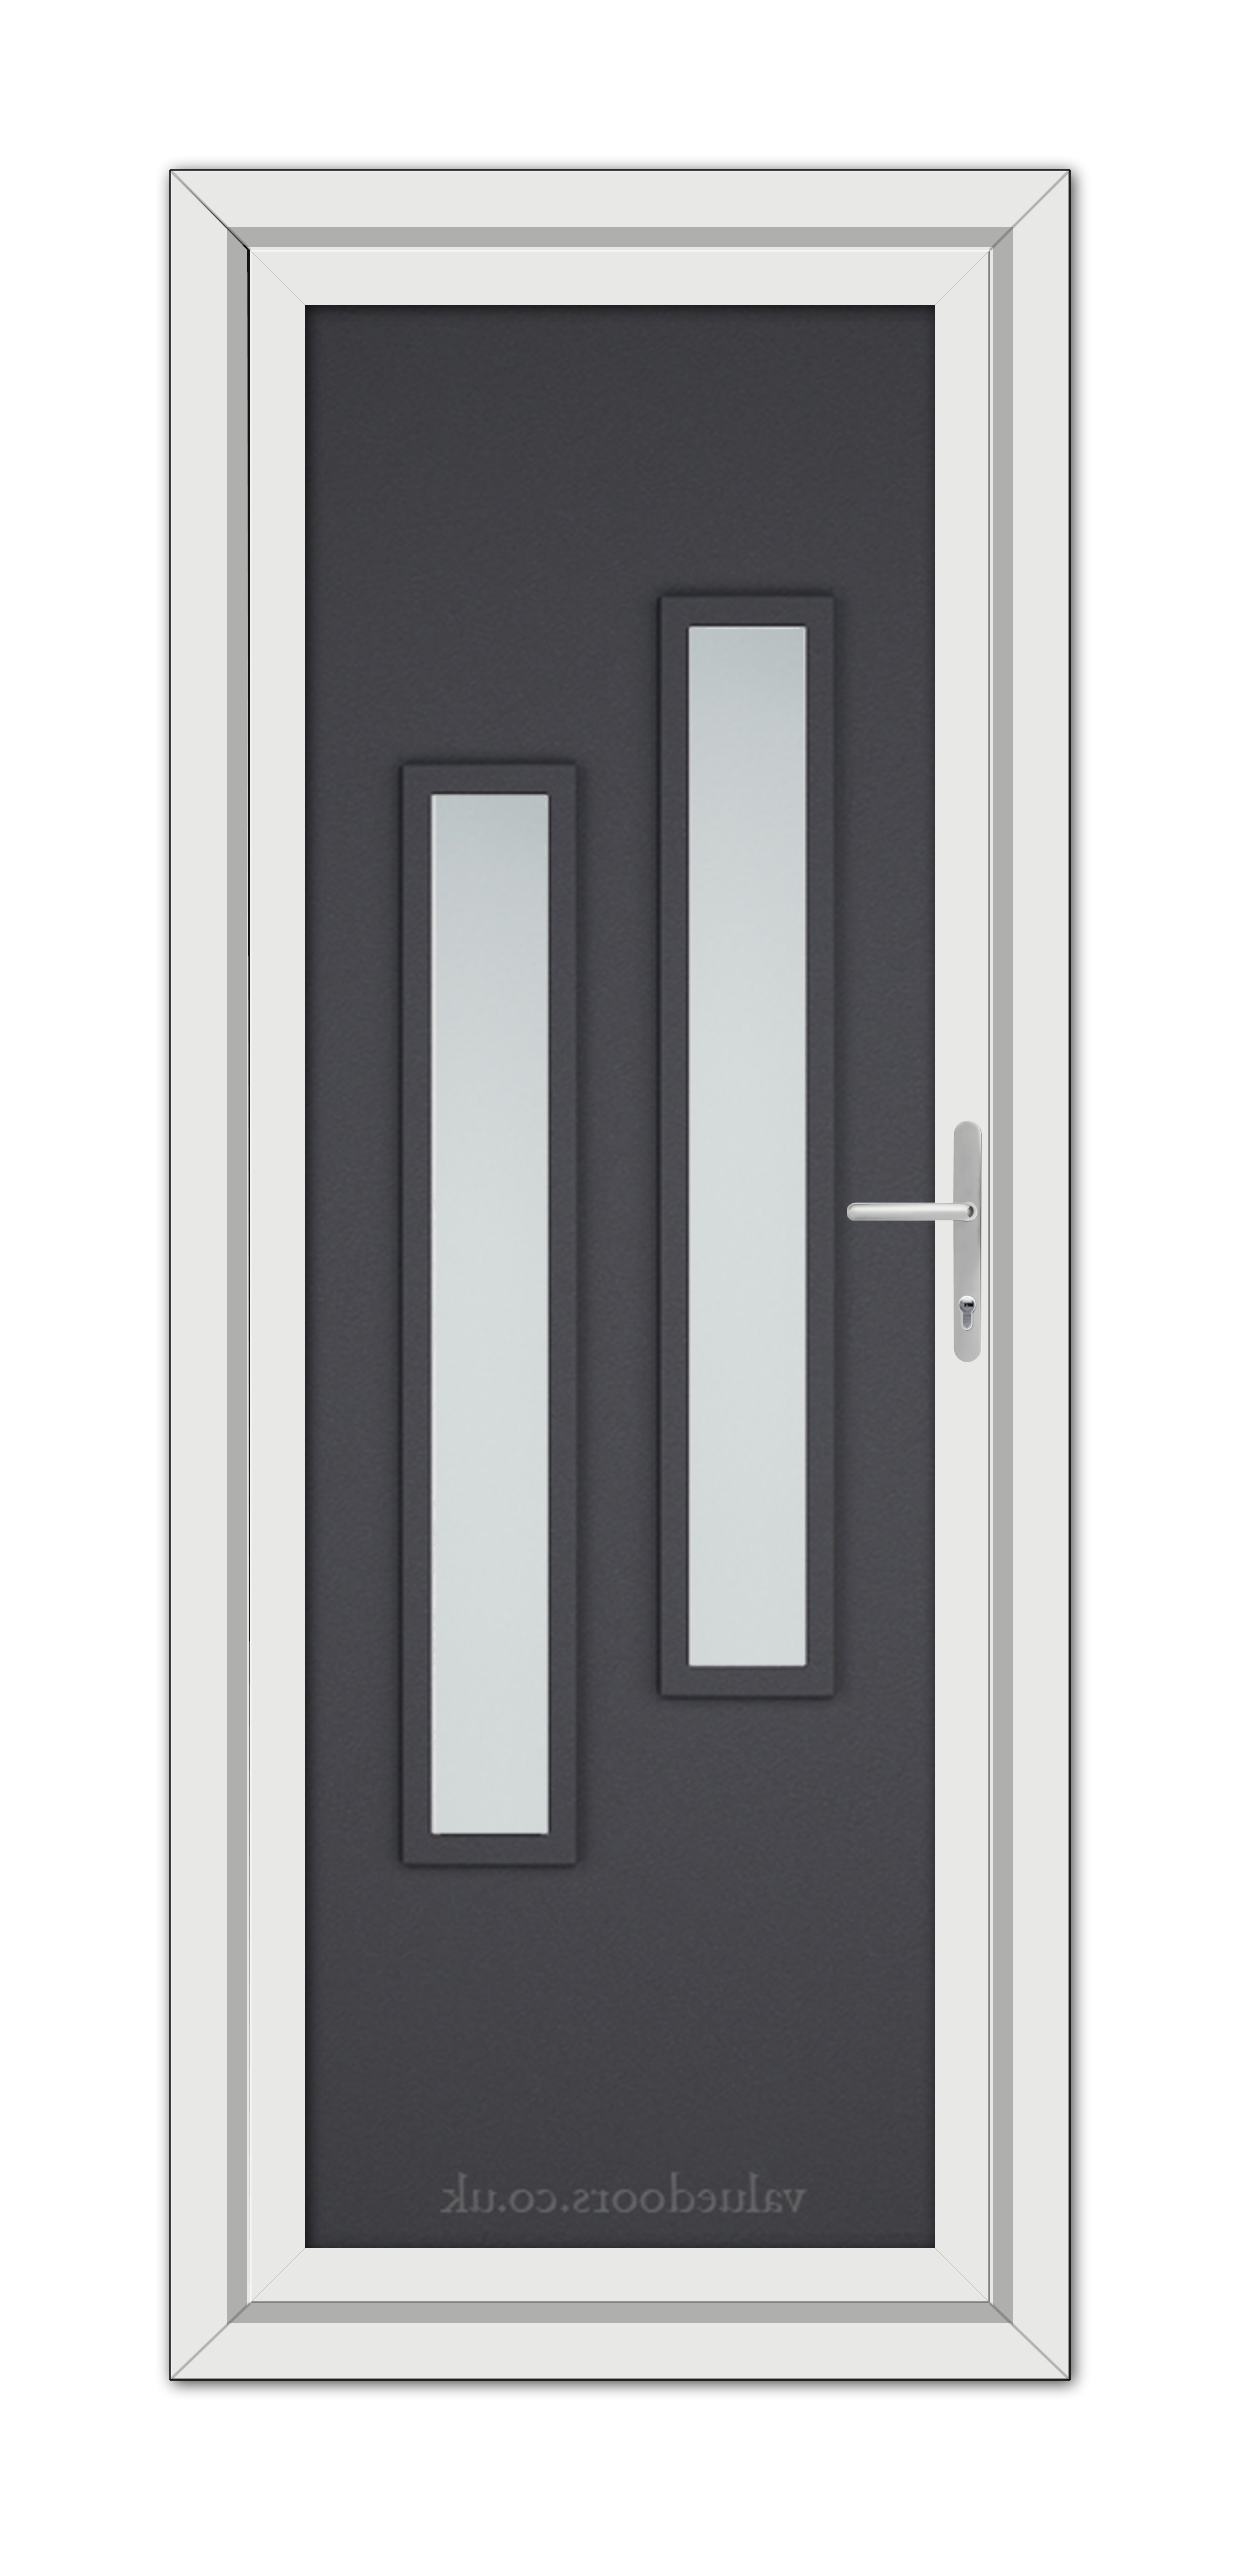 A Grey Grained Modern 5082 uPVC door with a white frame, featuring two vertical glass panels and a metallic handle on the right side.